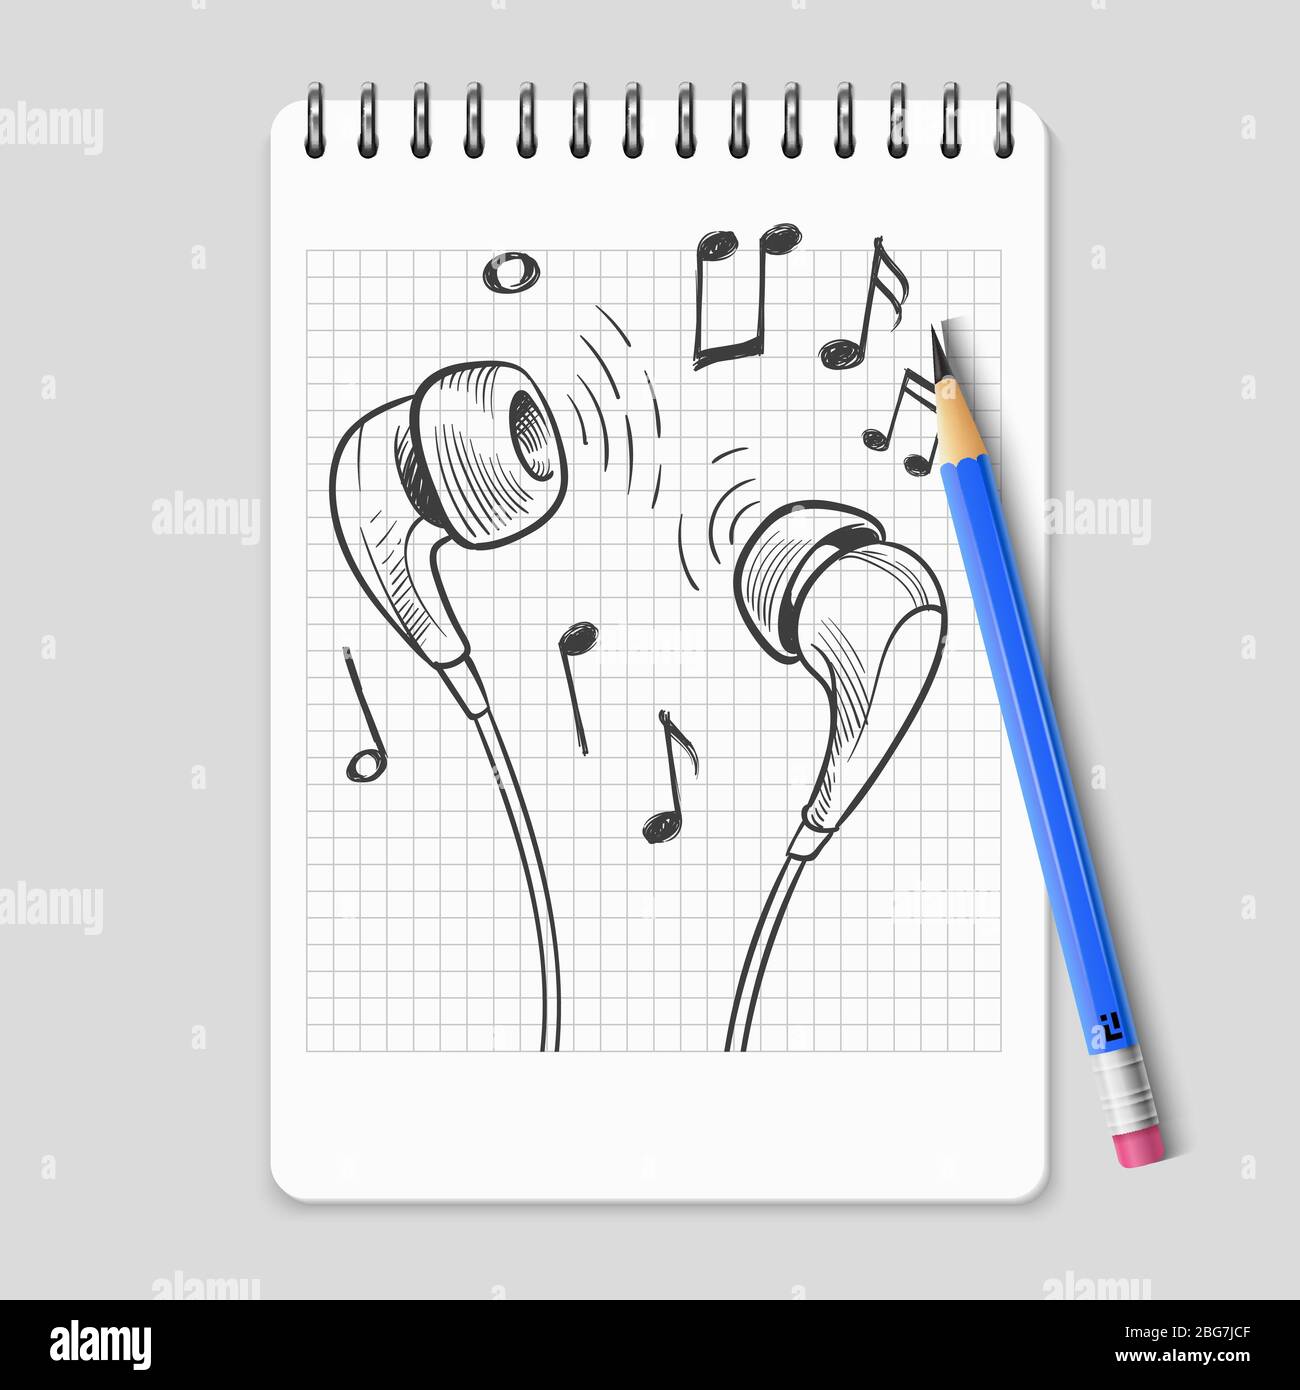 Music Drawing Ideas  Craftwhack